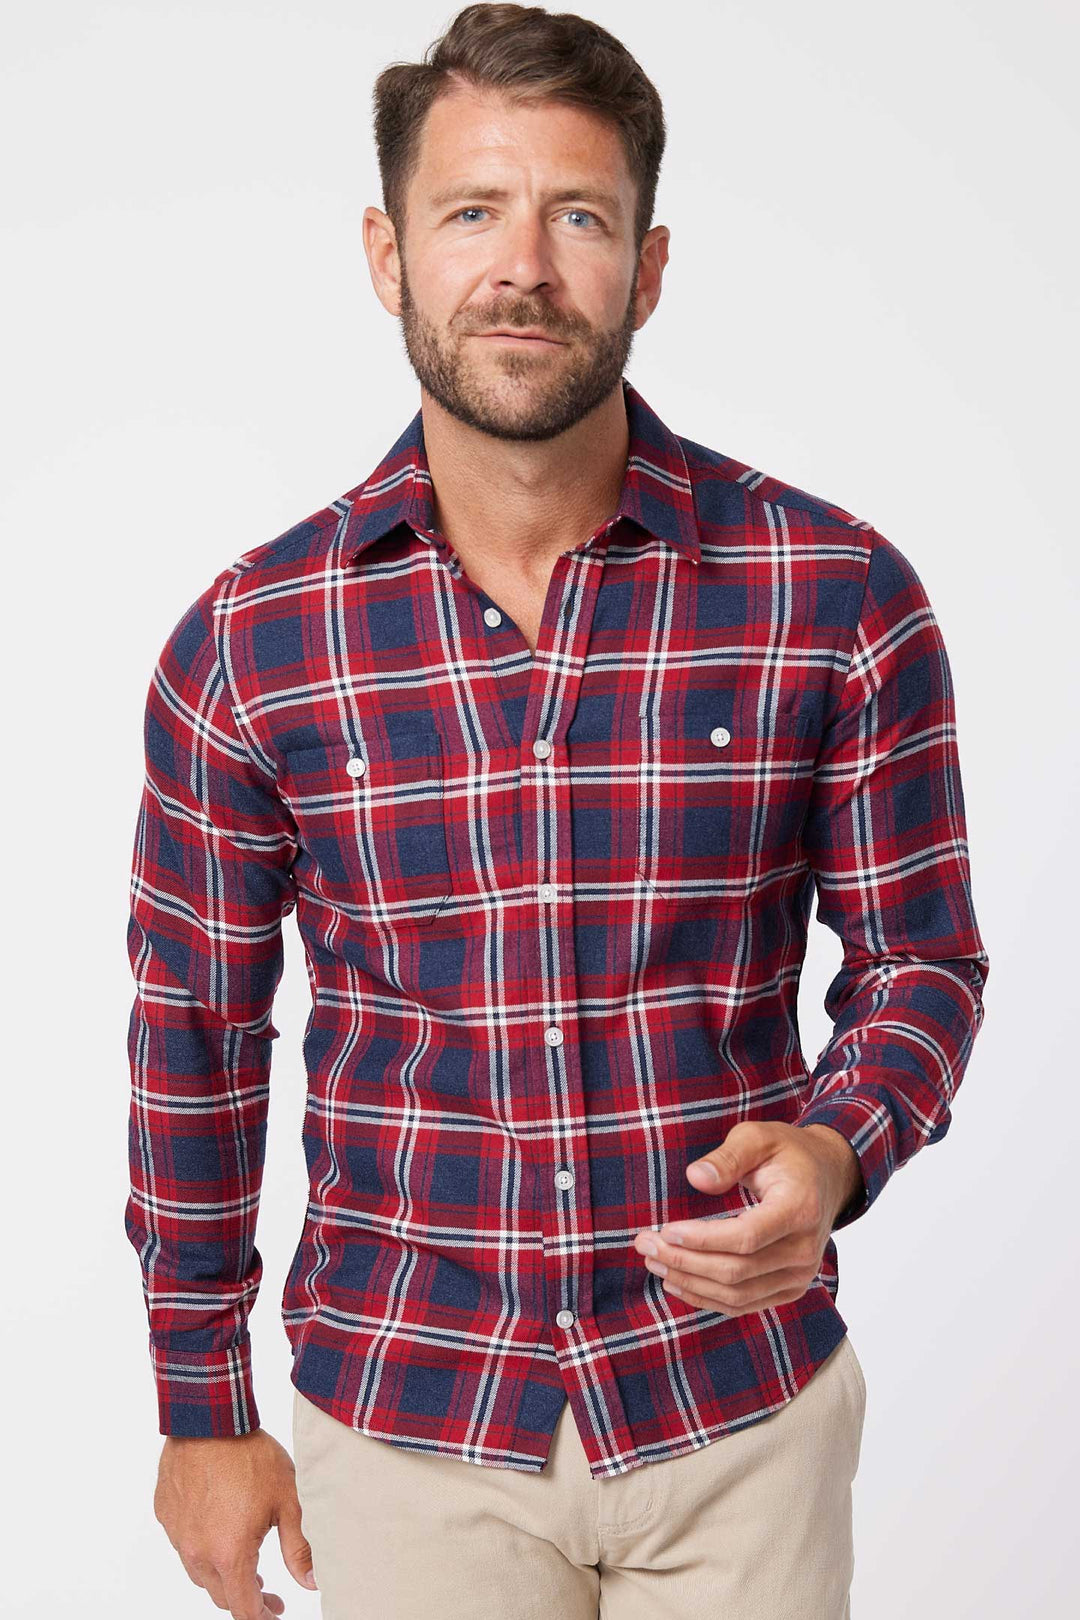 Buy Vintage Red Flannel Button-Down Shirt for Short Men | Ash & Erie   Flannel Everyday Shirt